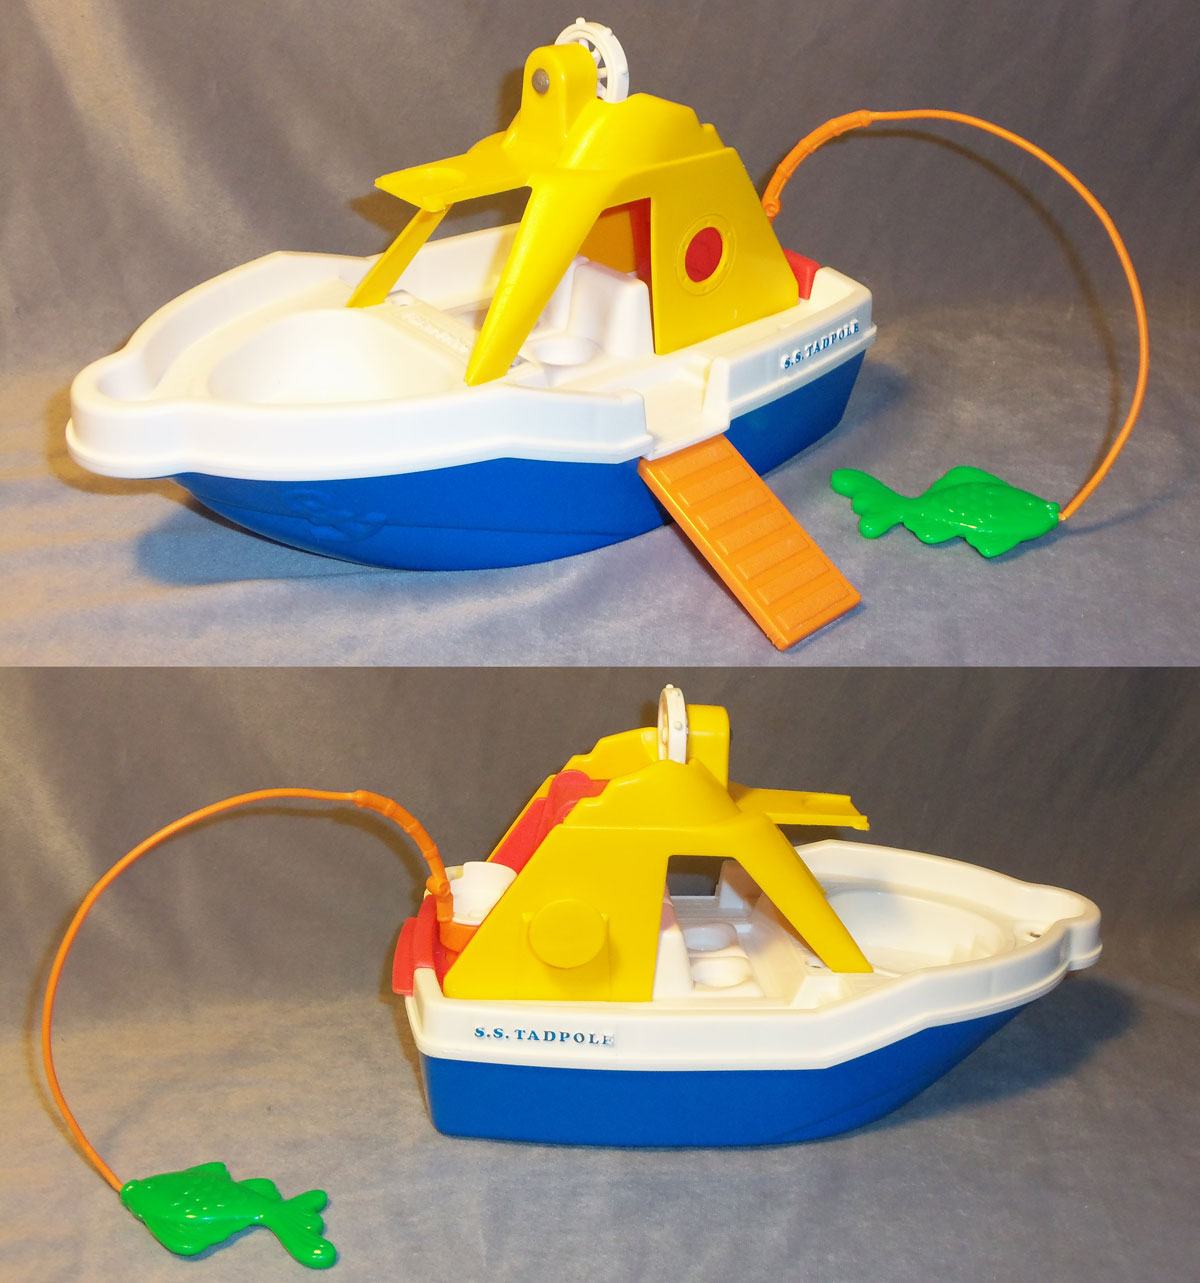 This Old Toy's Fisher-Price Original Little People Vehicles - Large Boats